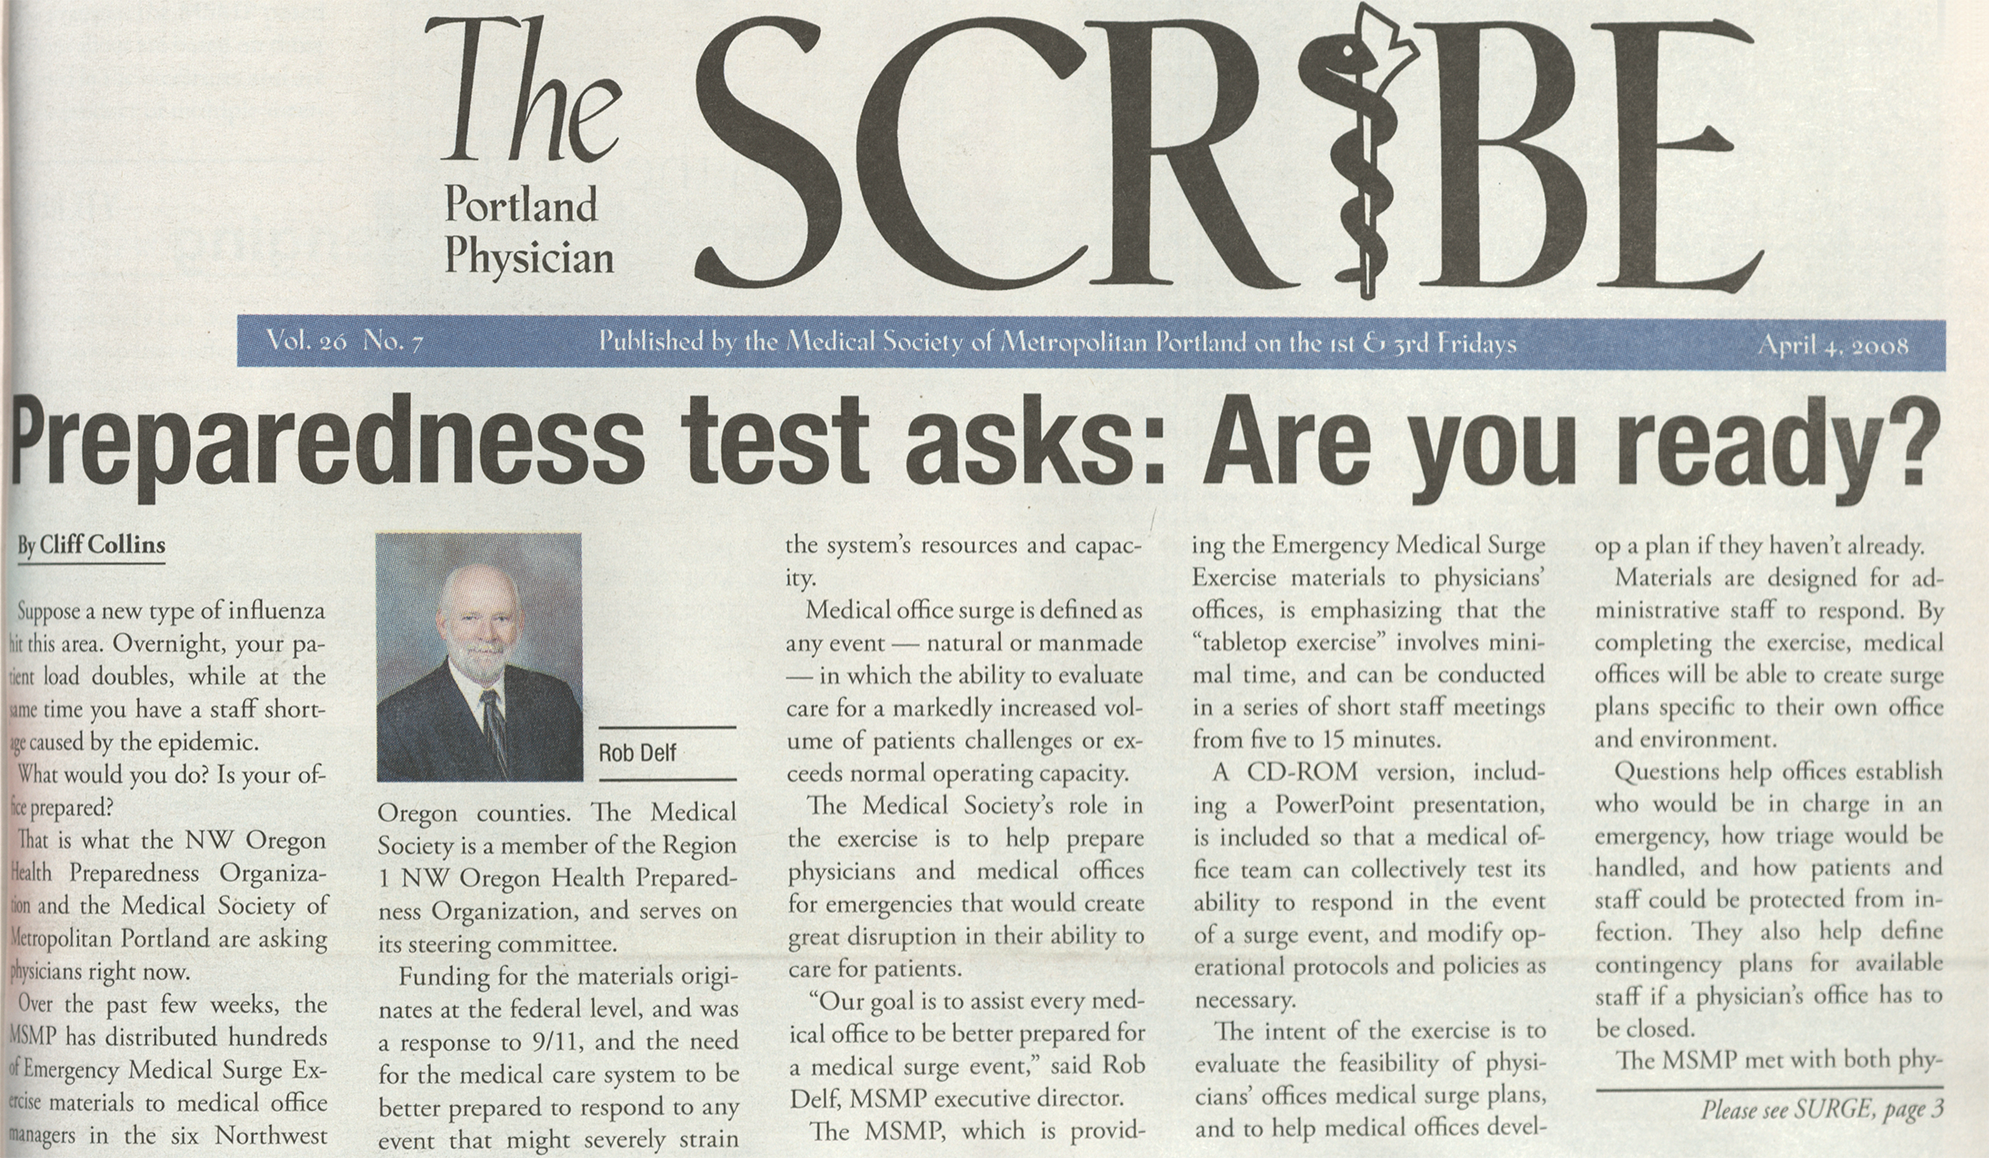 The Scribe cover story: "Preparedness test asks: Are you ready?"